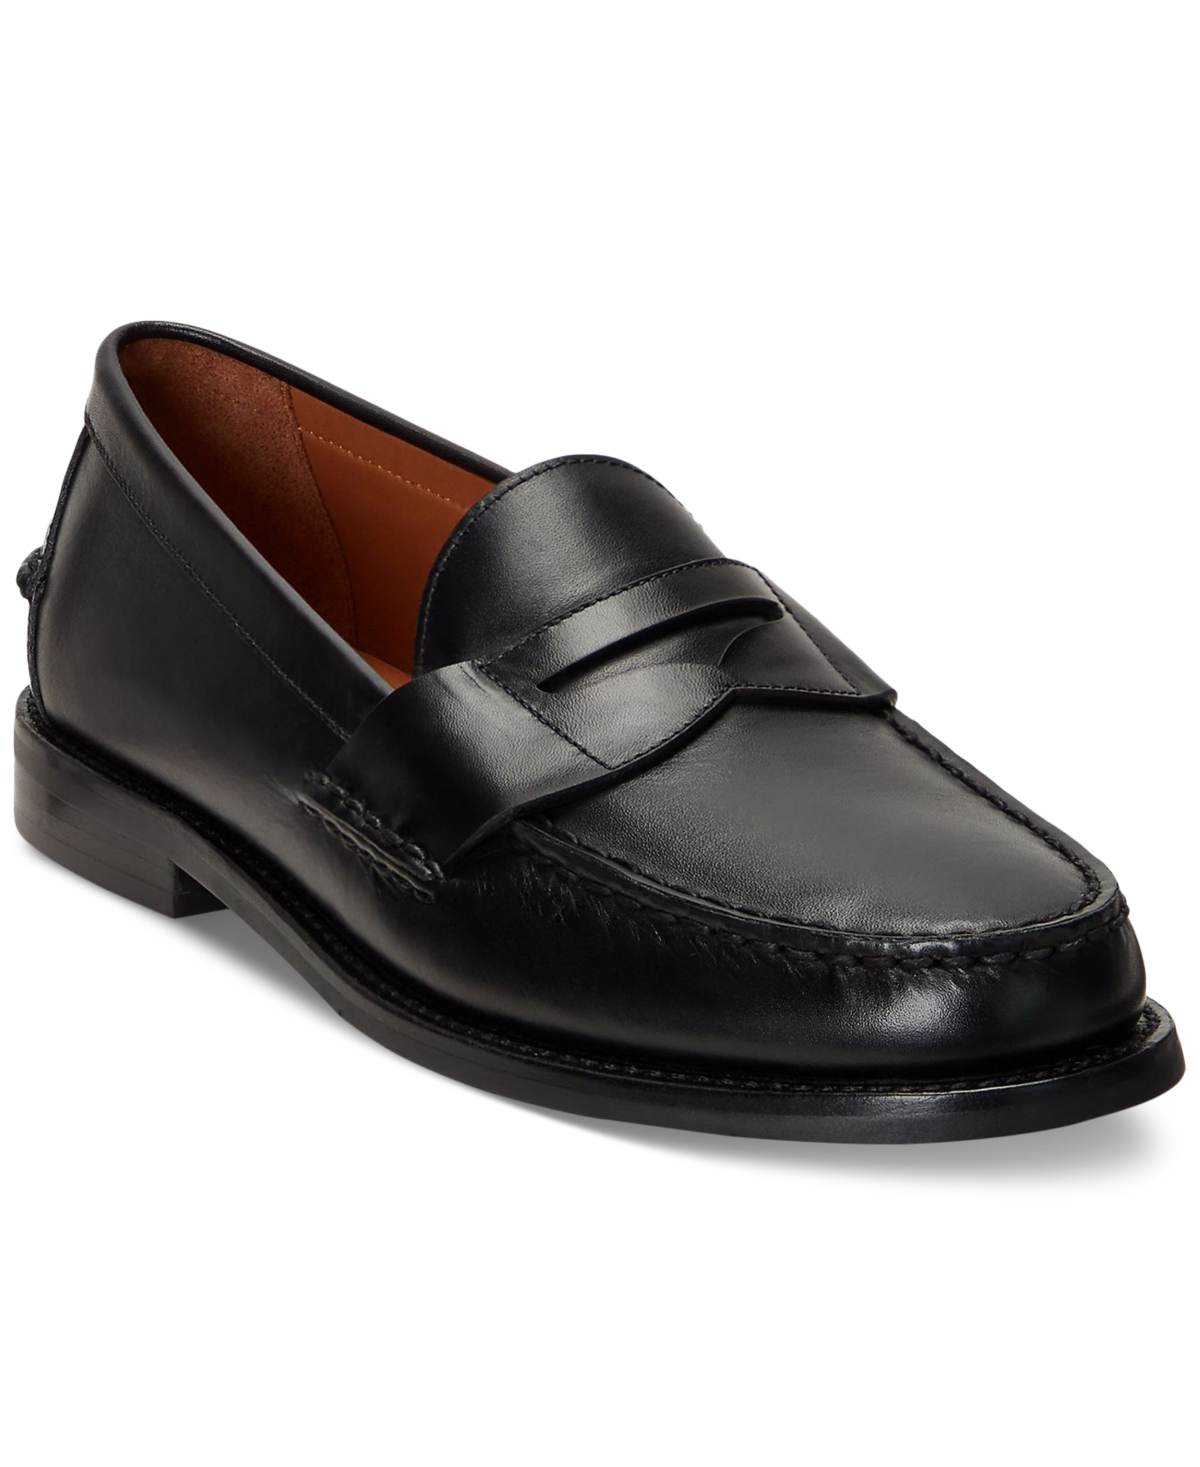 Men's Alston Leather Penny Loafers - Black